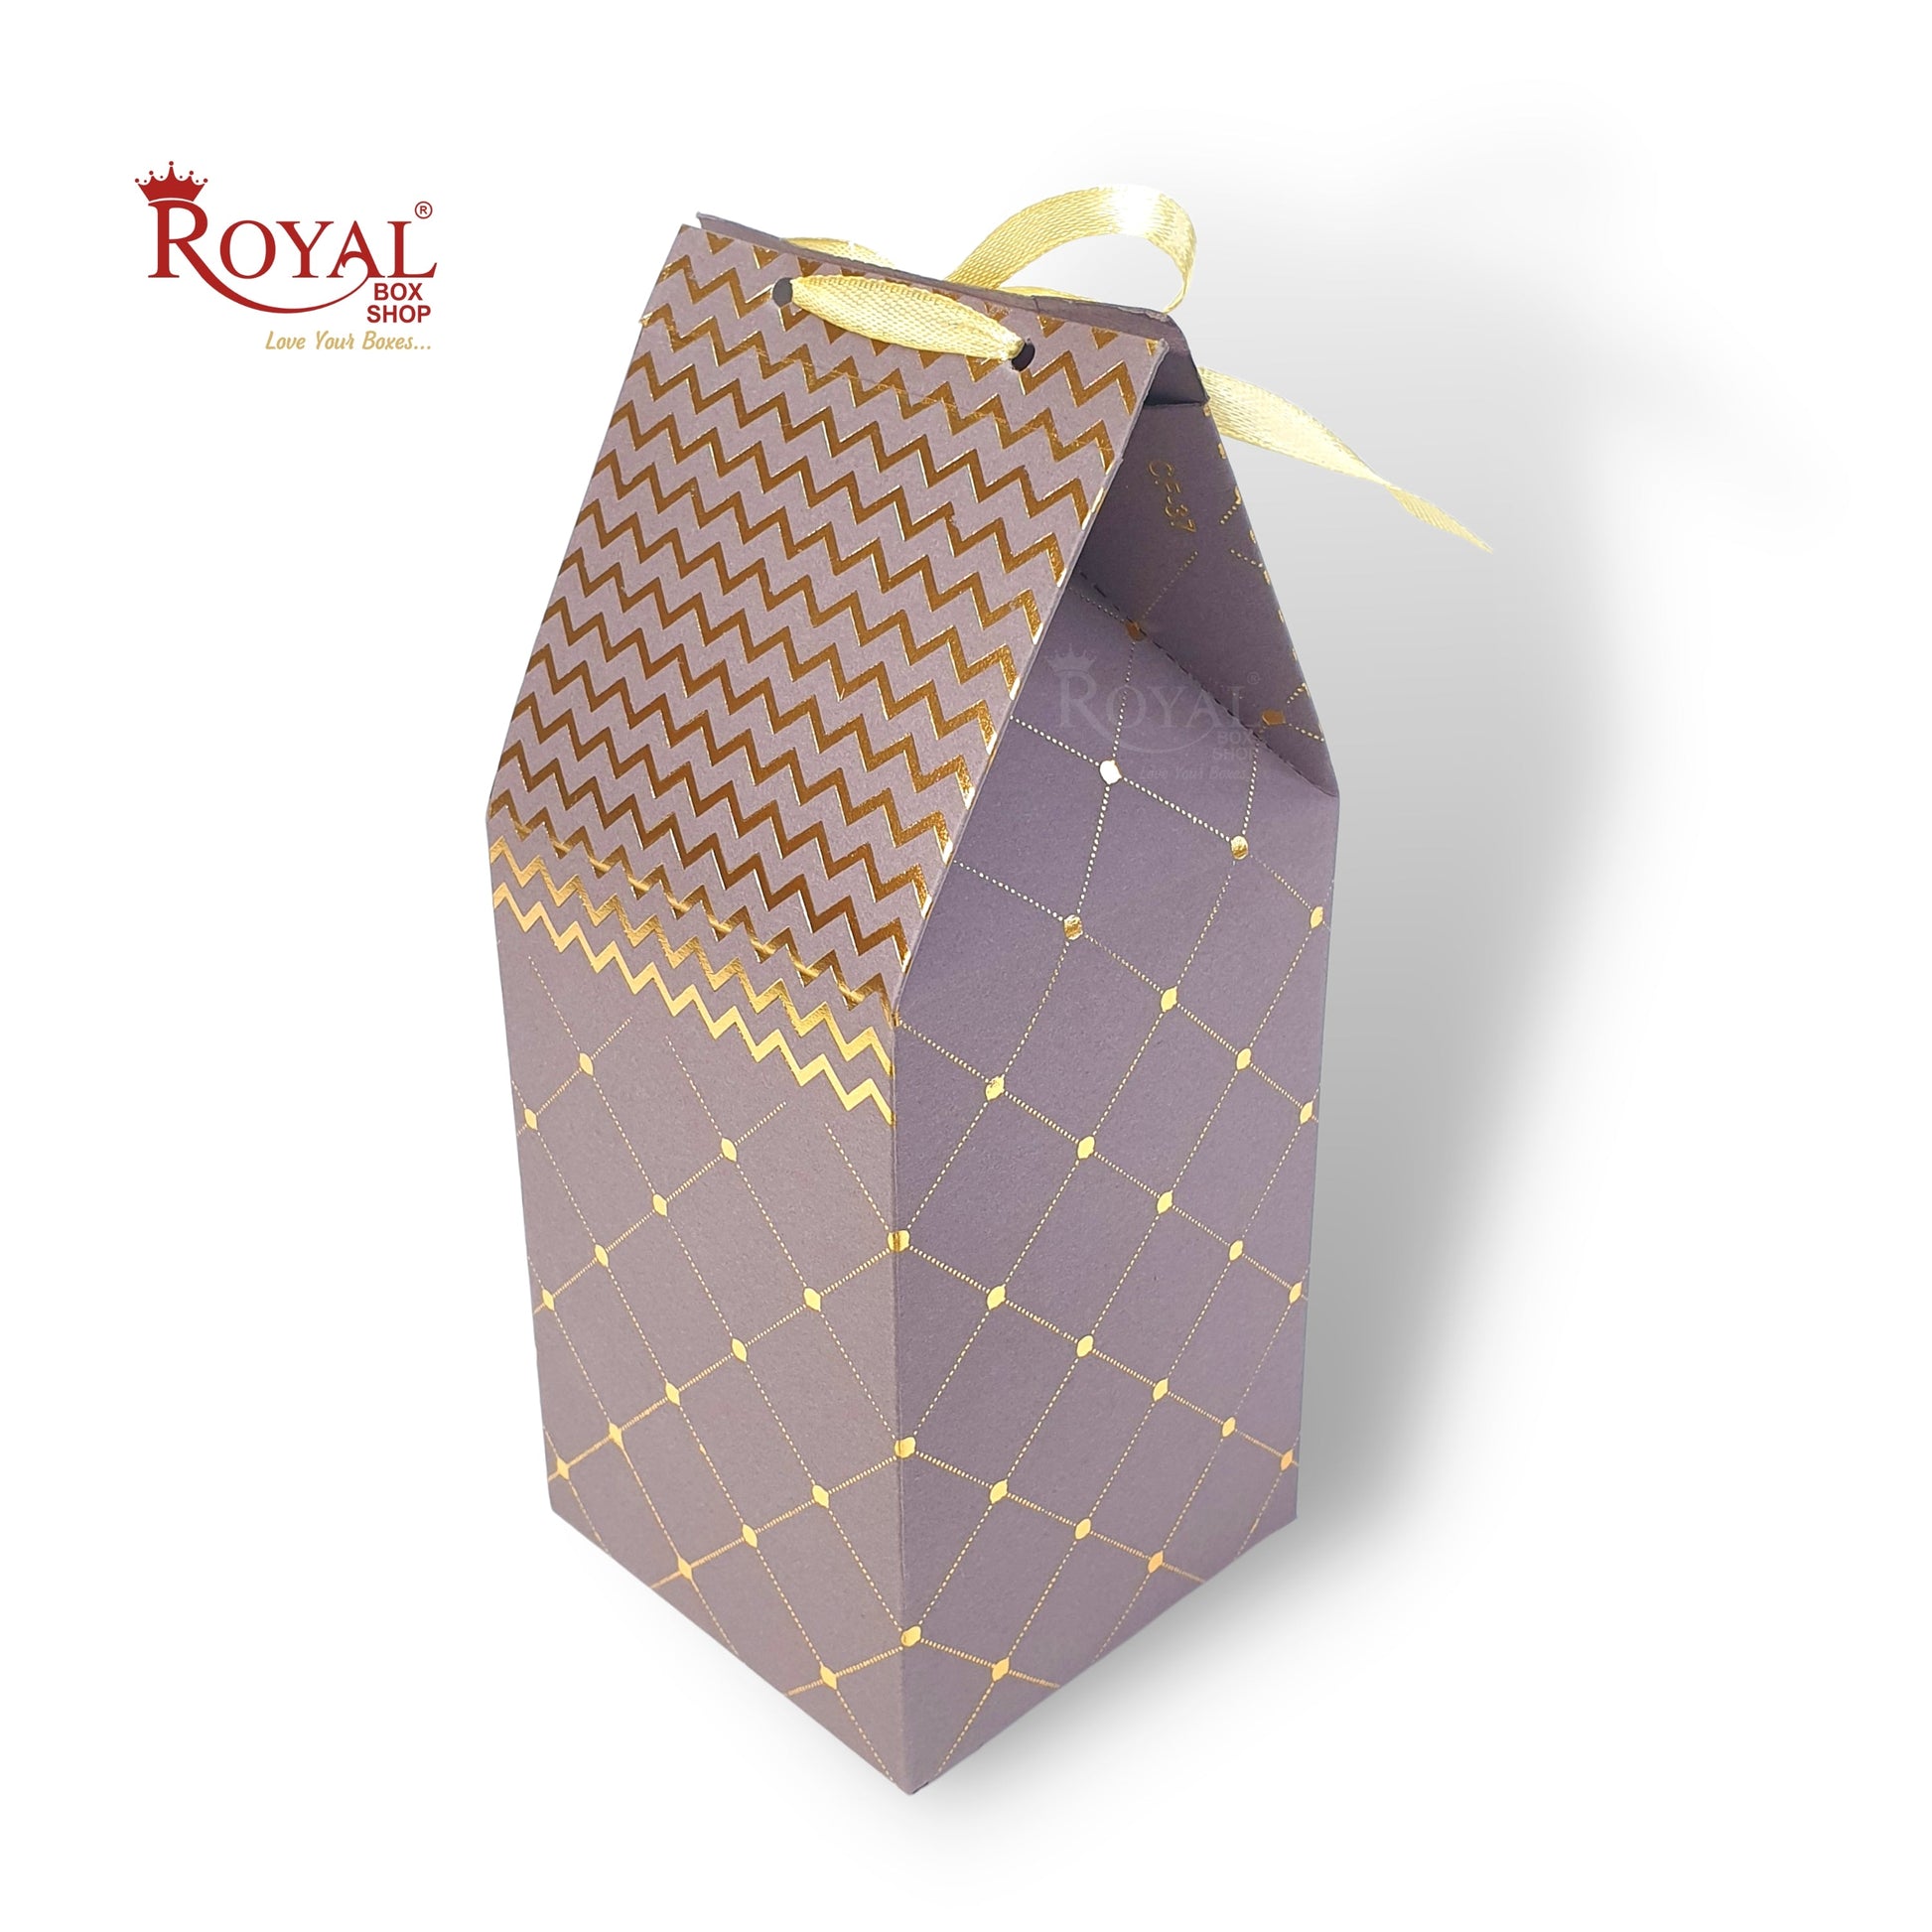 Premium Gift Box with Window I Light Brown Gold Leafing Print I 4.5x3x3 inches I For Return Favor Gift, Baby Shower Gifts, Room Hampers, Candy Box, Birthday Return Gift Royal Box Shop